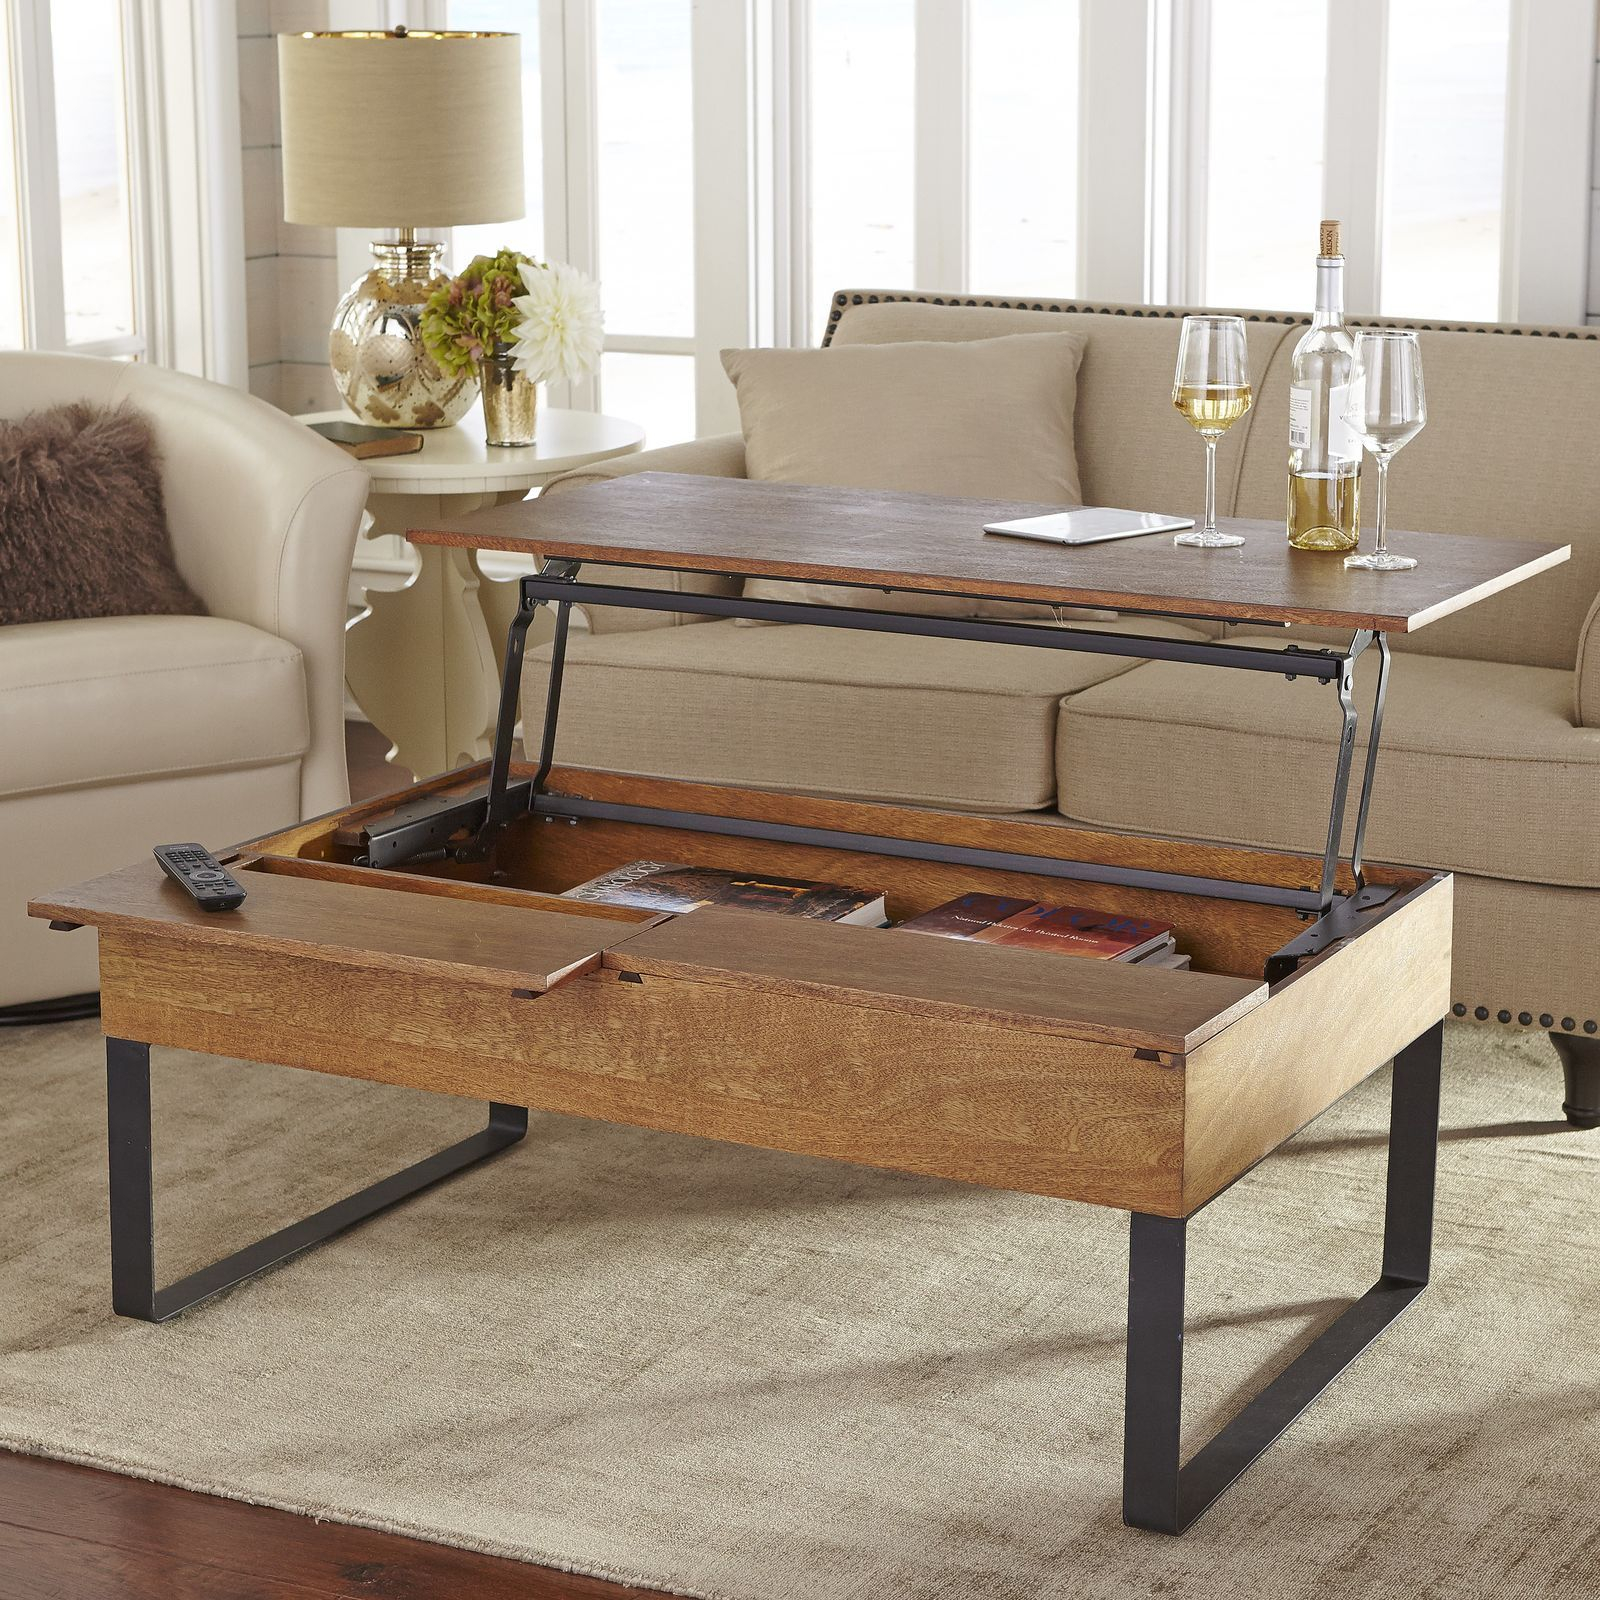 Hugh Java Lift Top Coffee Table In 2019 Decorating Lift Top in sizing 1600 X 1600